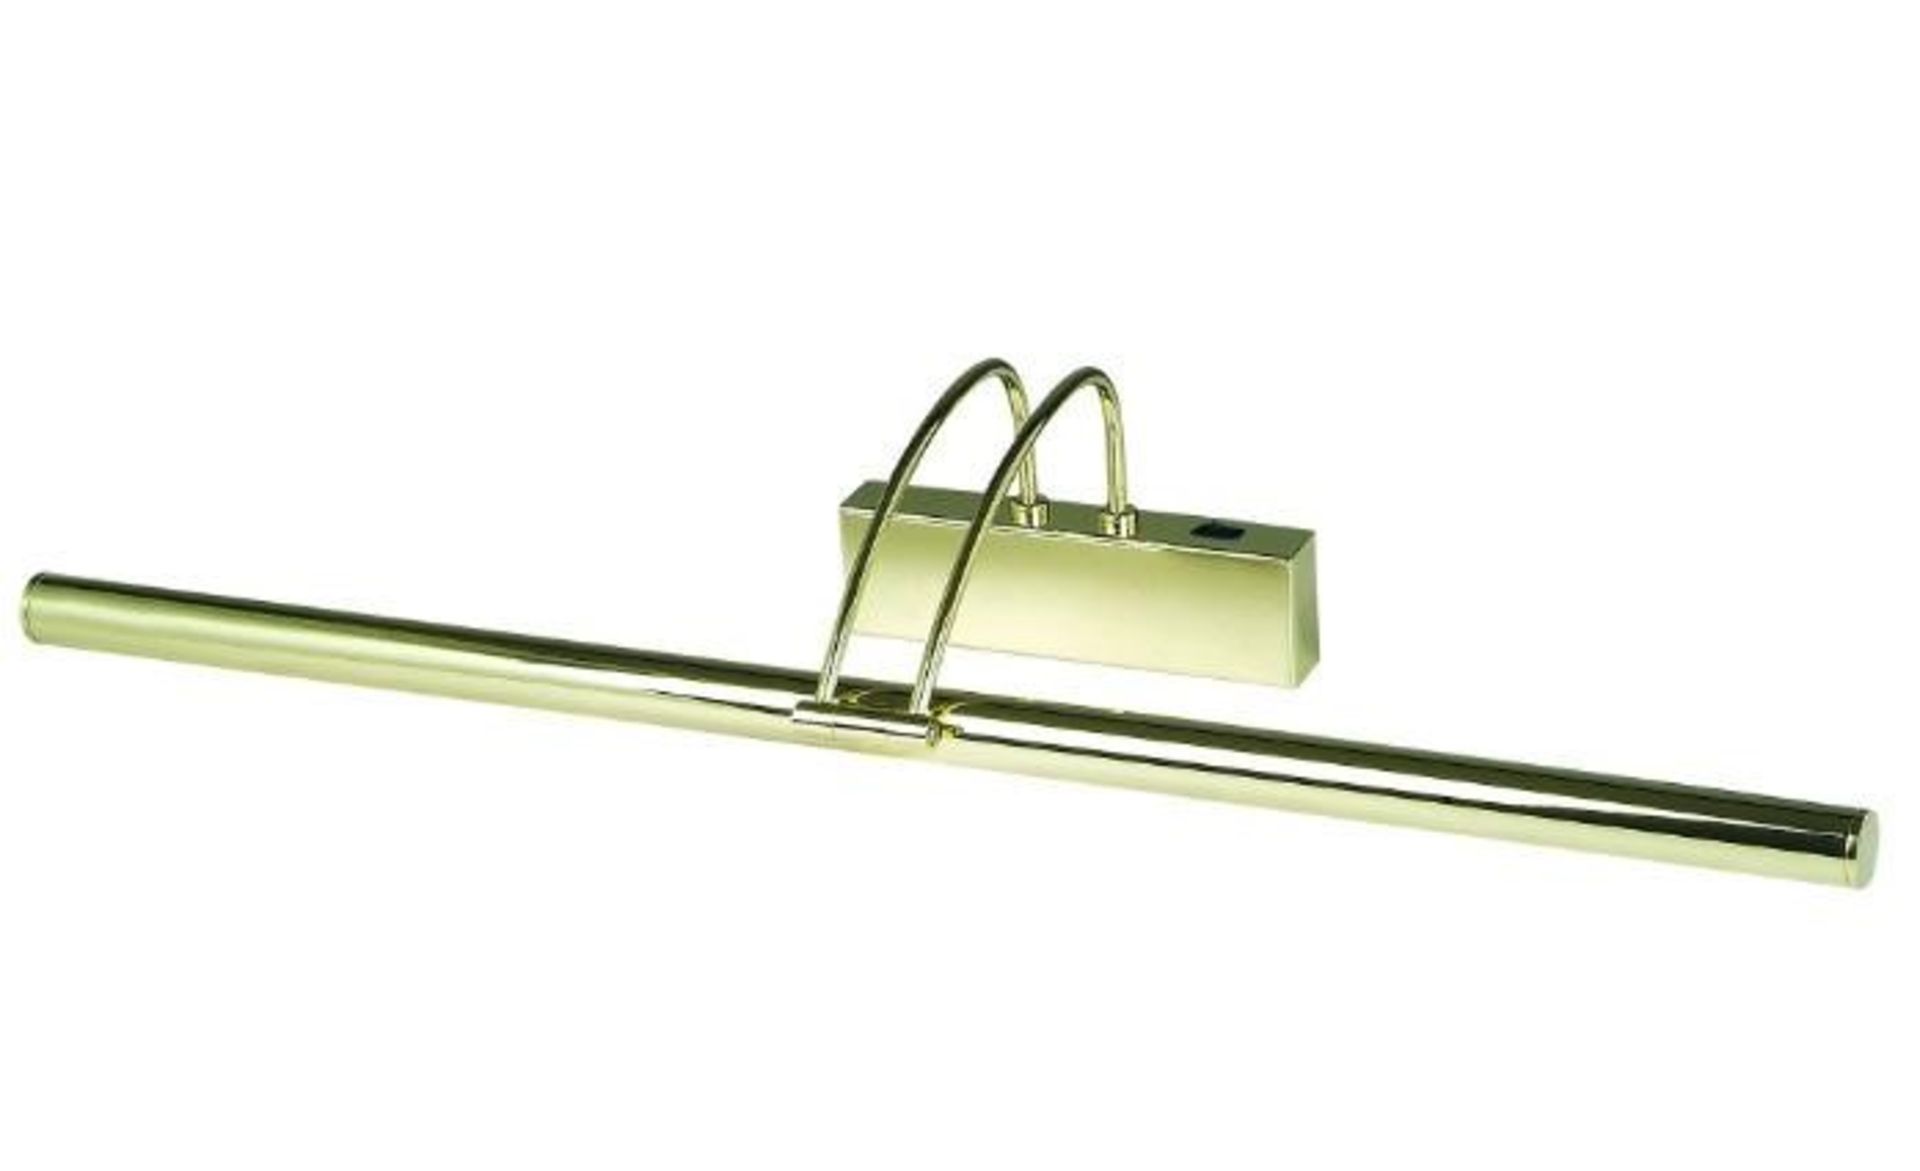 1 x Polished Brass Picture Light With Adjustable Head, Switched - Ex Display Stock - CL298 - Ref: J1 - Image 2 of 3